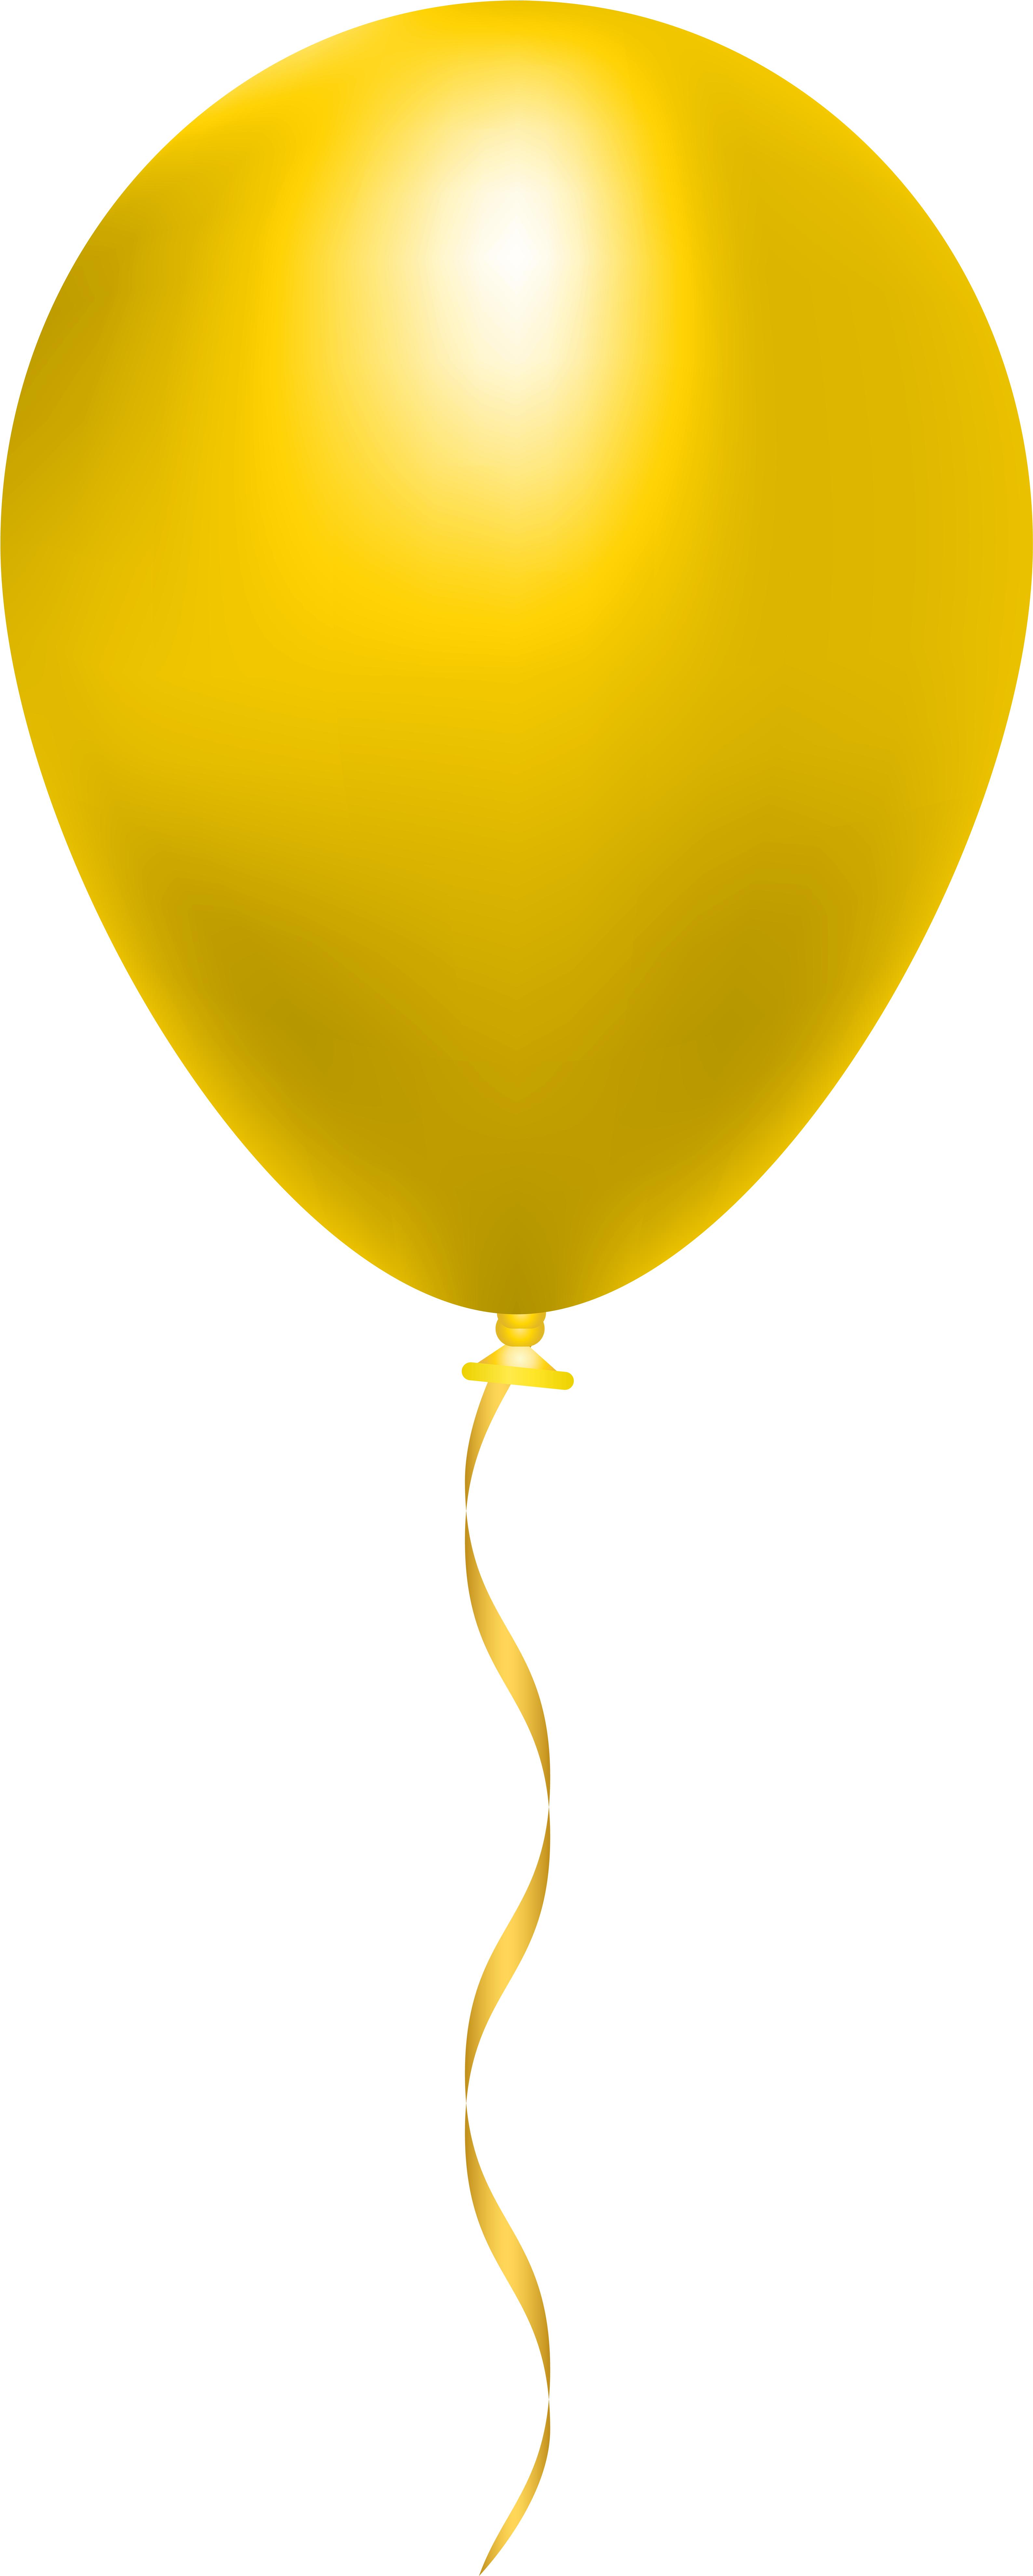 Download Ballons Transparent Yellow Yellow Balloon Clipart Png Png